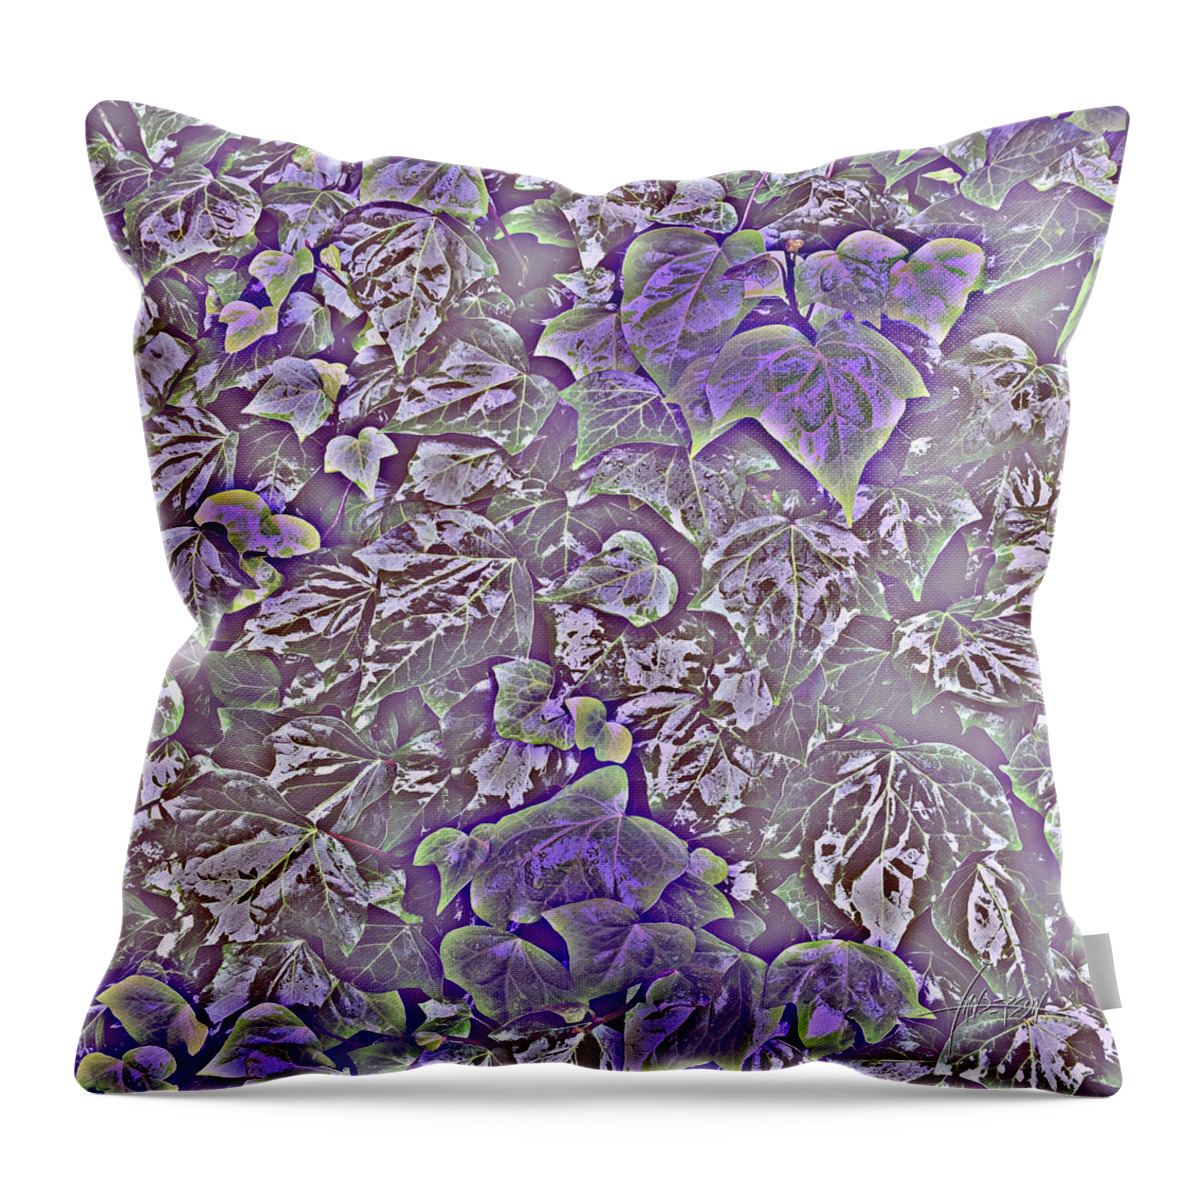 Digital Art Throw Pillow featuring the photograph Metamorphos by Ian Anderson